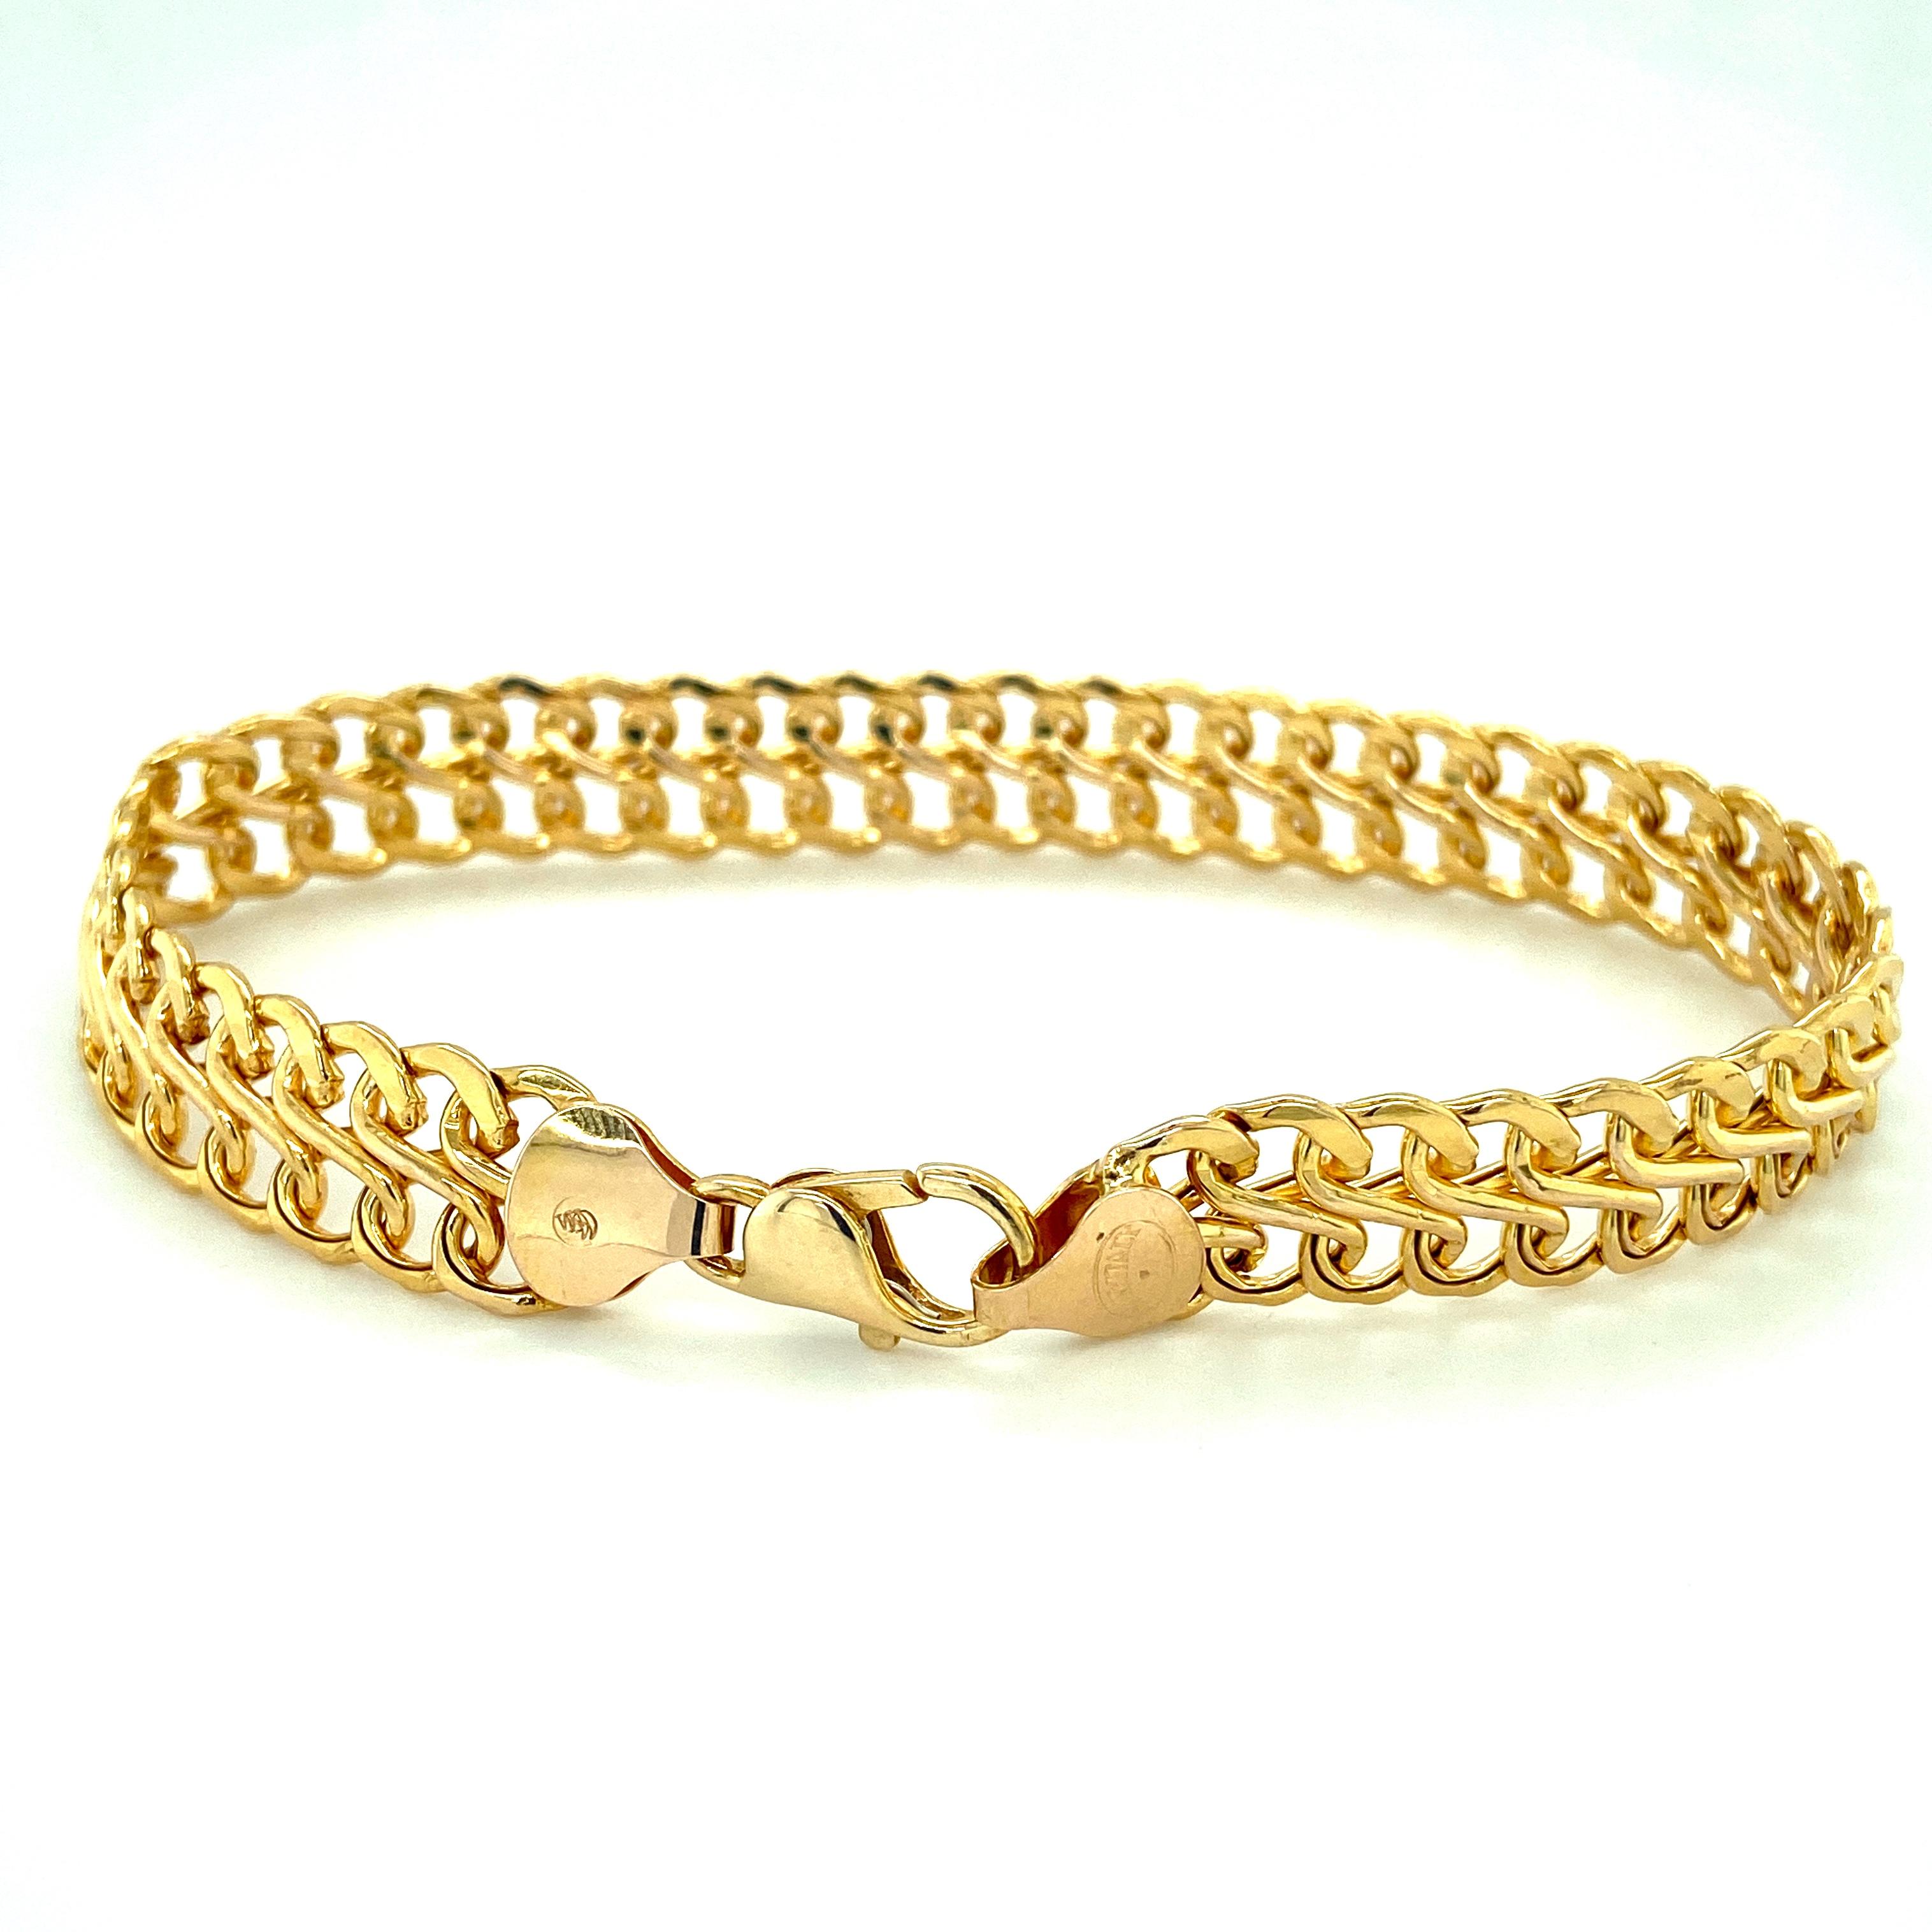 One 14 karat yellow gold (stamped 14K ITALY) double row s-link mesh bracelet measuring 10.5mm wide and 7.75 inches long.  


